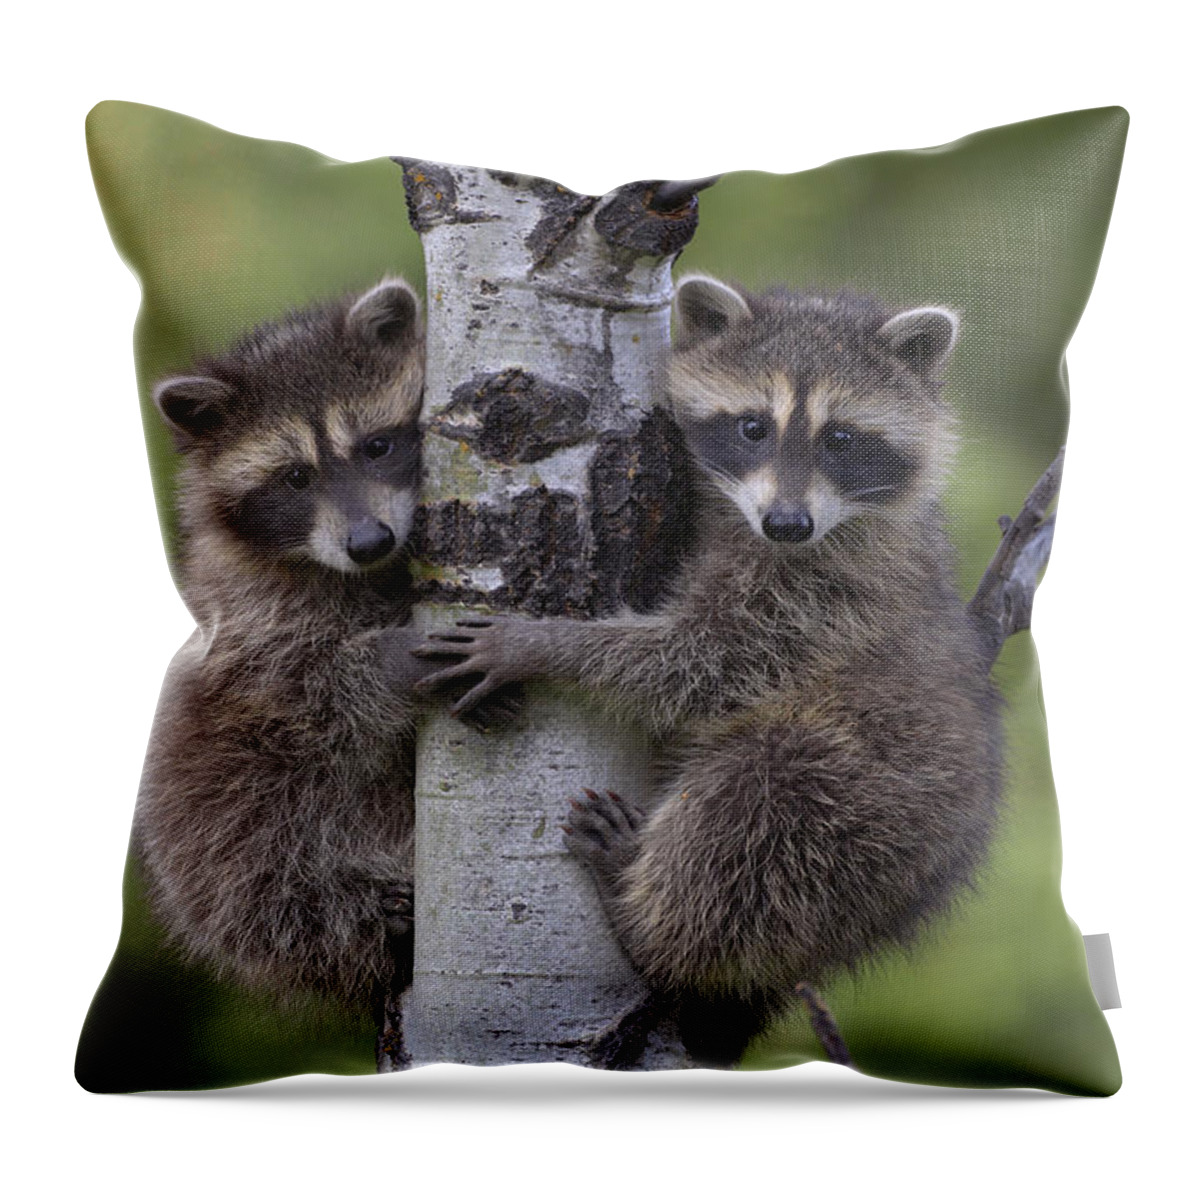 00176520 Throw Pillow featuring the photograph Raccoon Two Babies Climbing Tree by Tim Fitzharris